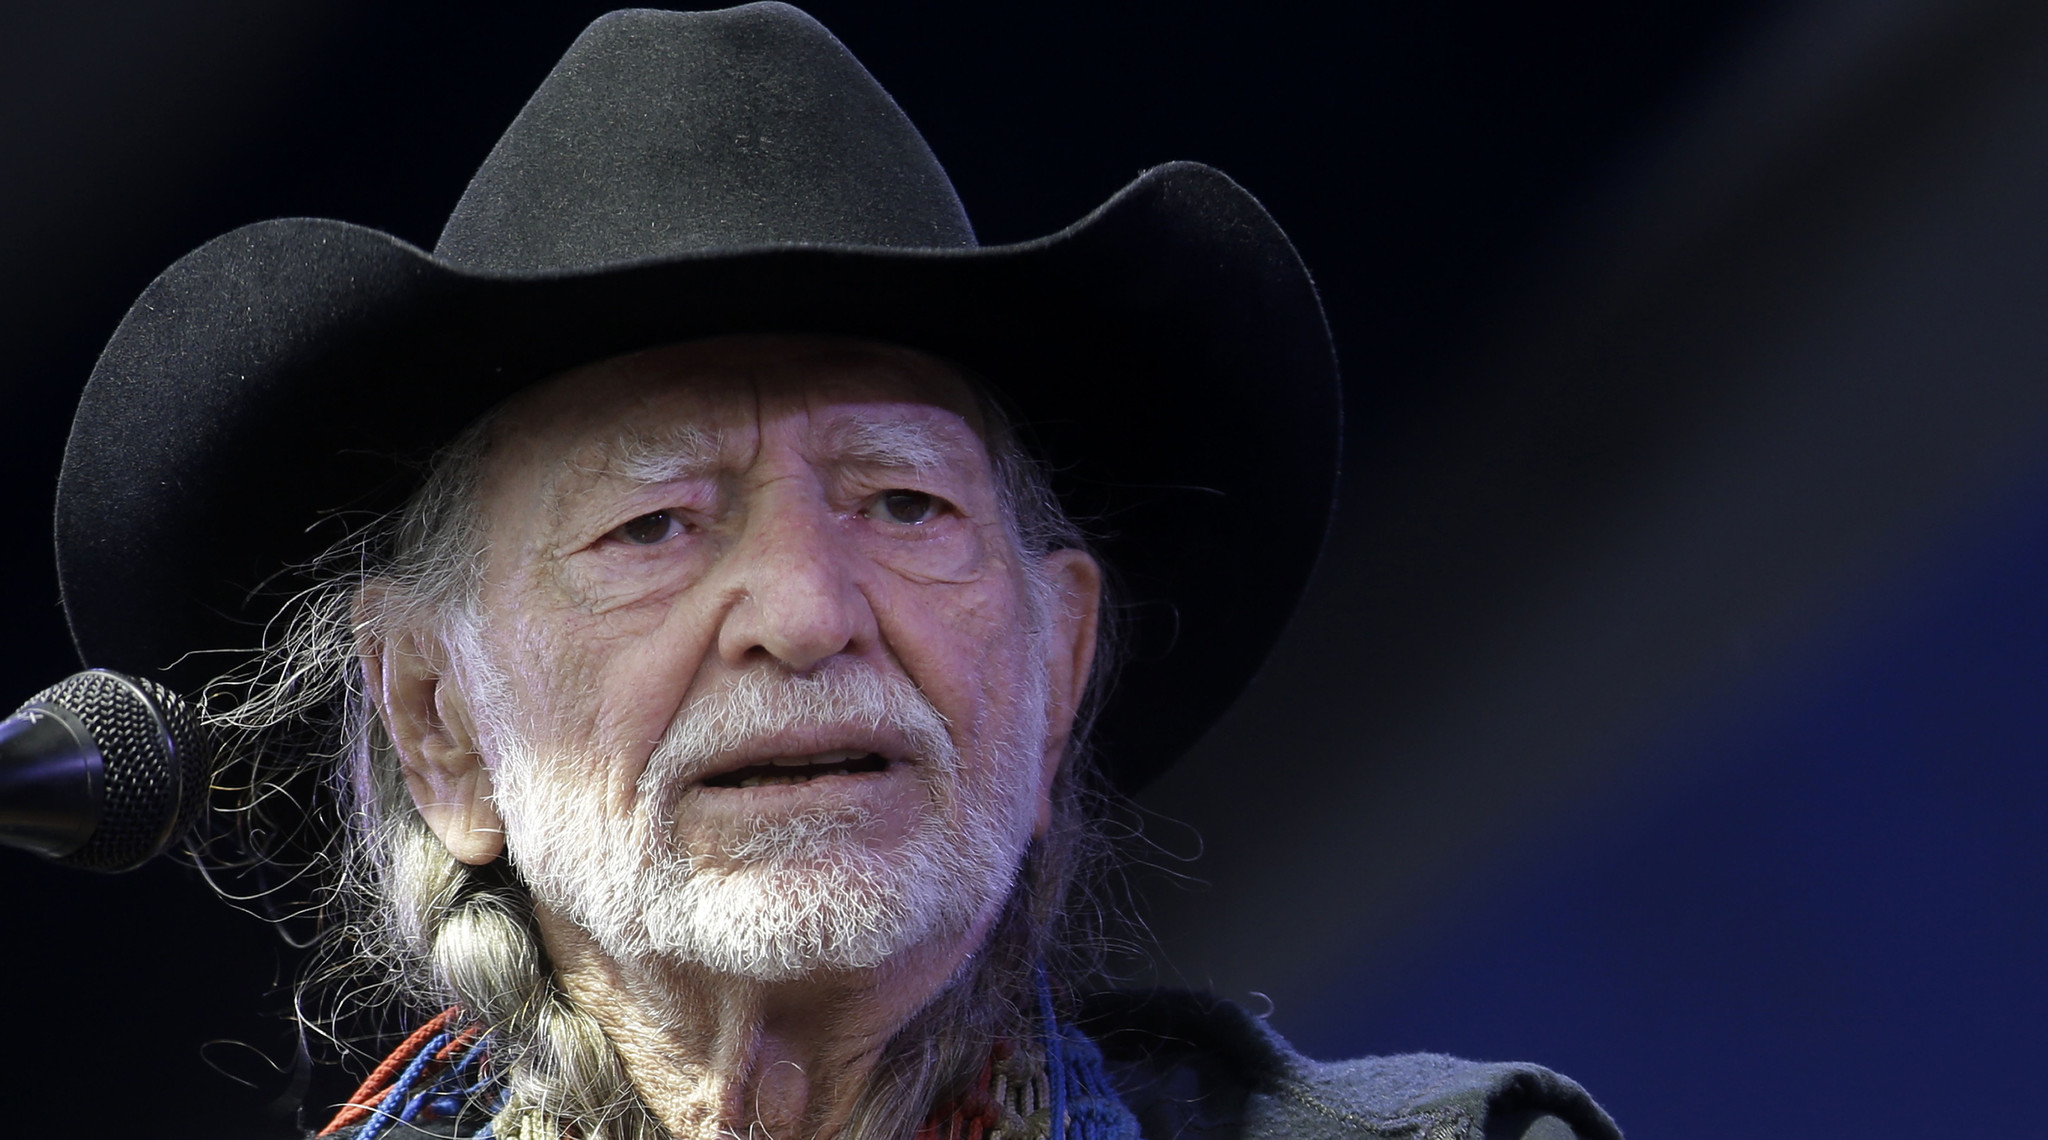 Willie Nelson, Merle Haggard pass joint in new video; Nelson's sons, Neil Young to collaborate